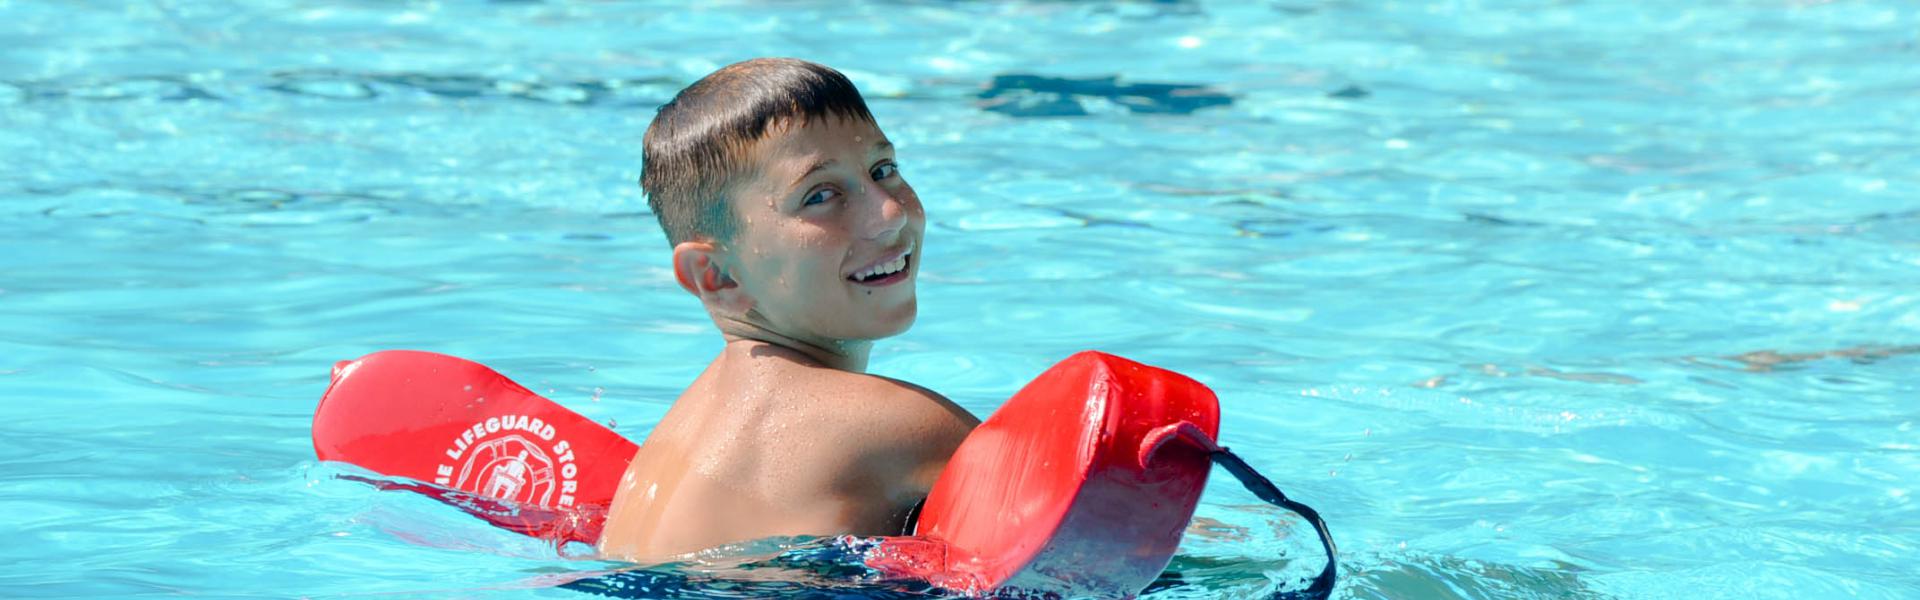 Boy Swimming with Floaters